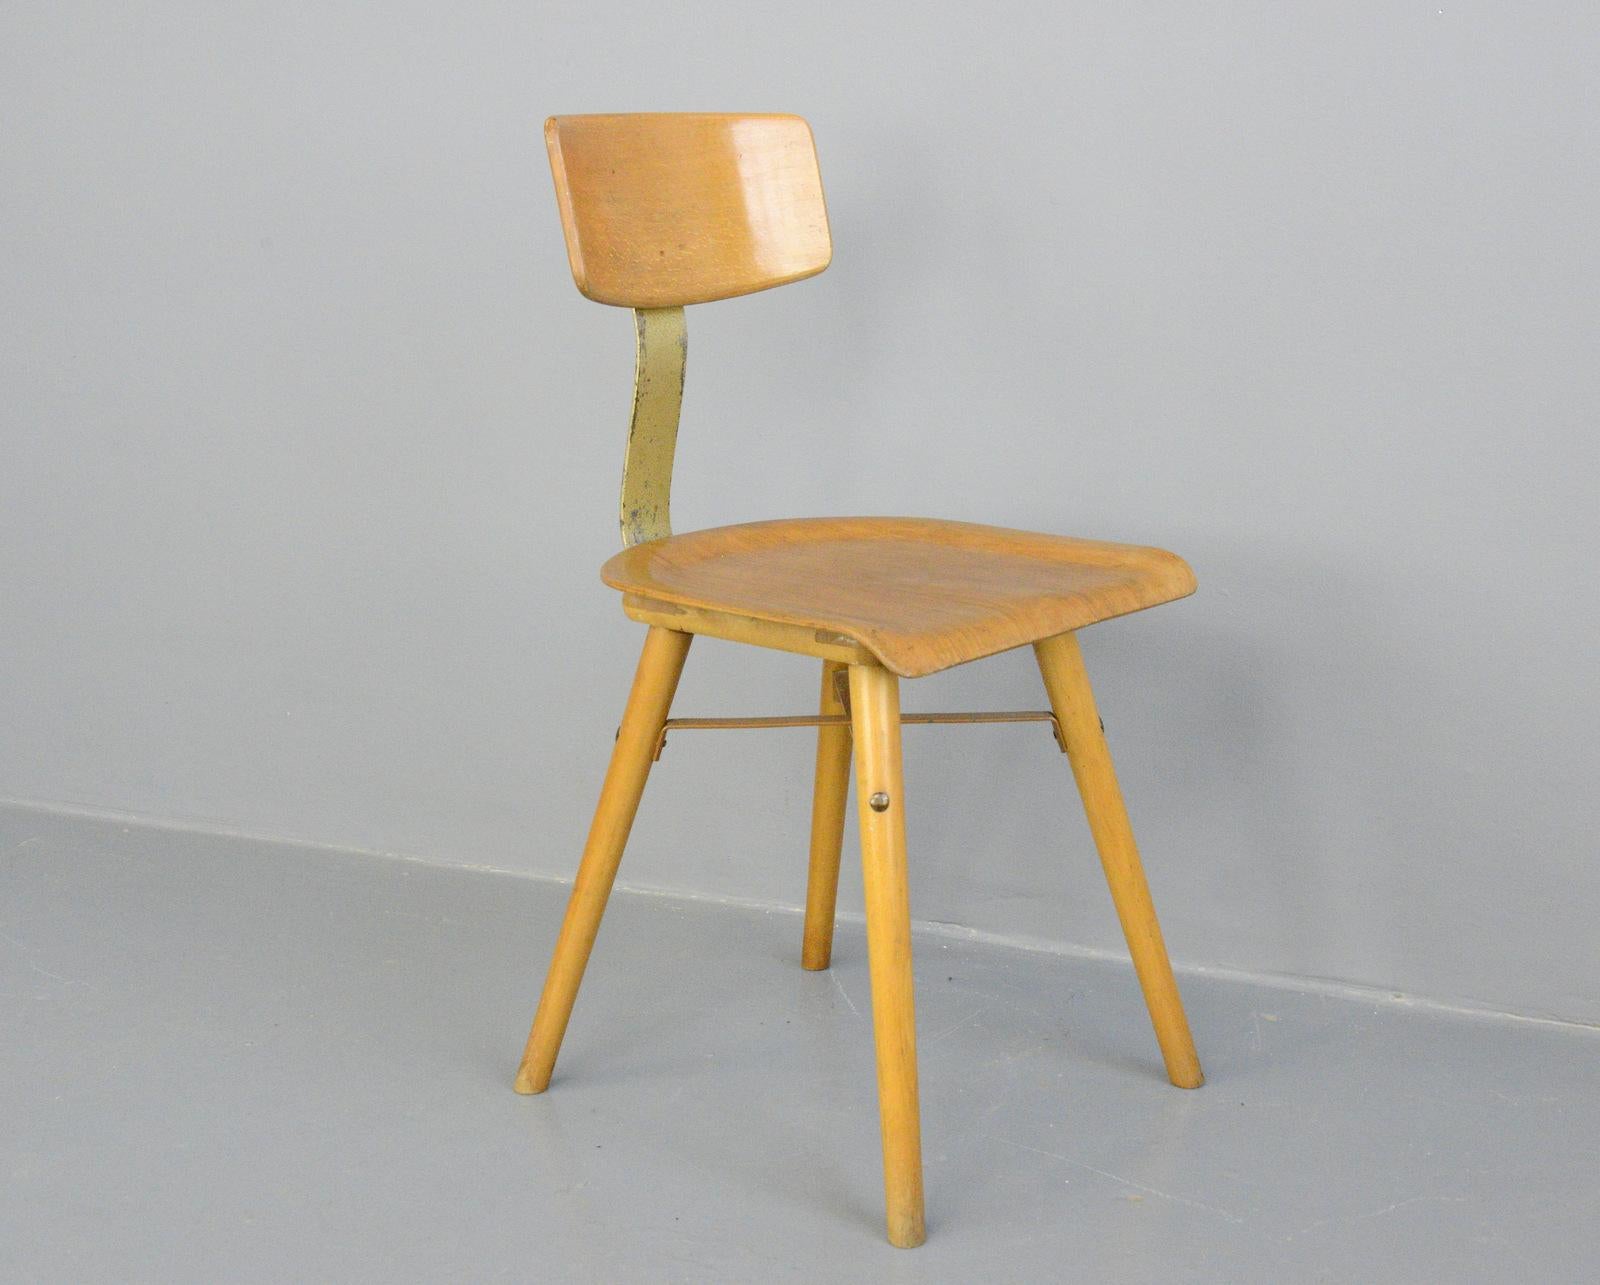 Beech Industrial Work Stool By Ama, circa 1930s For Sale